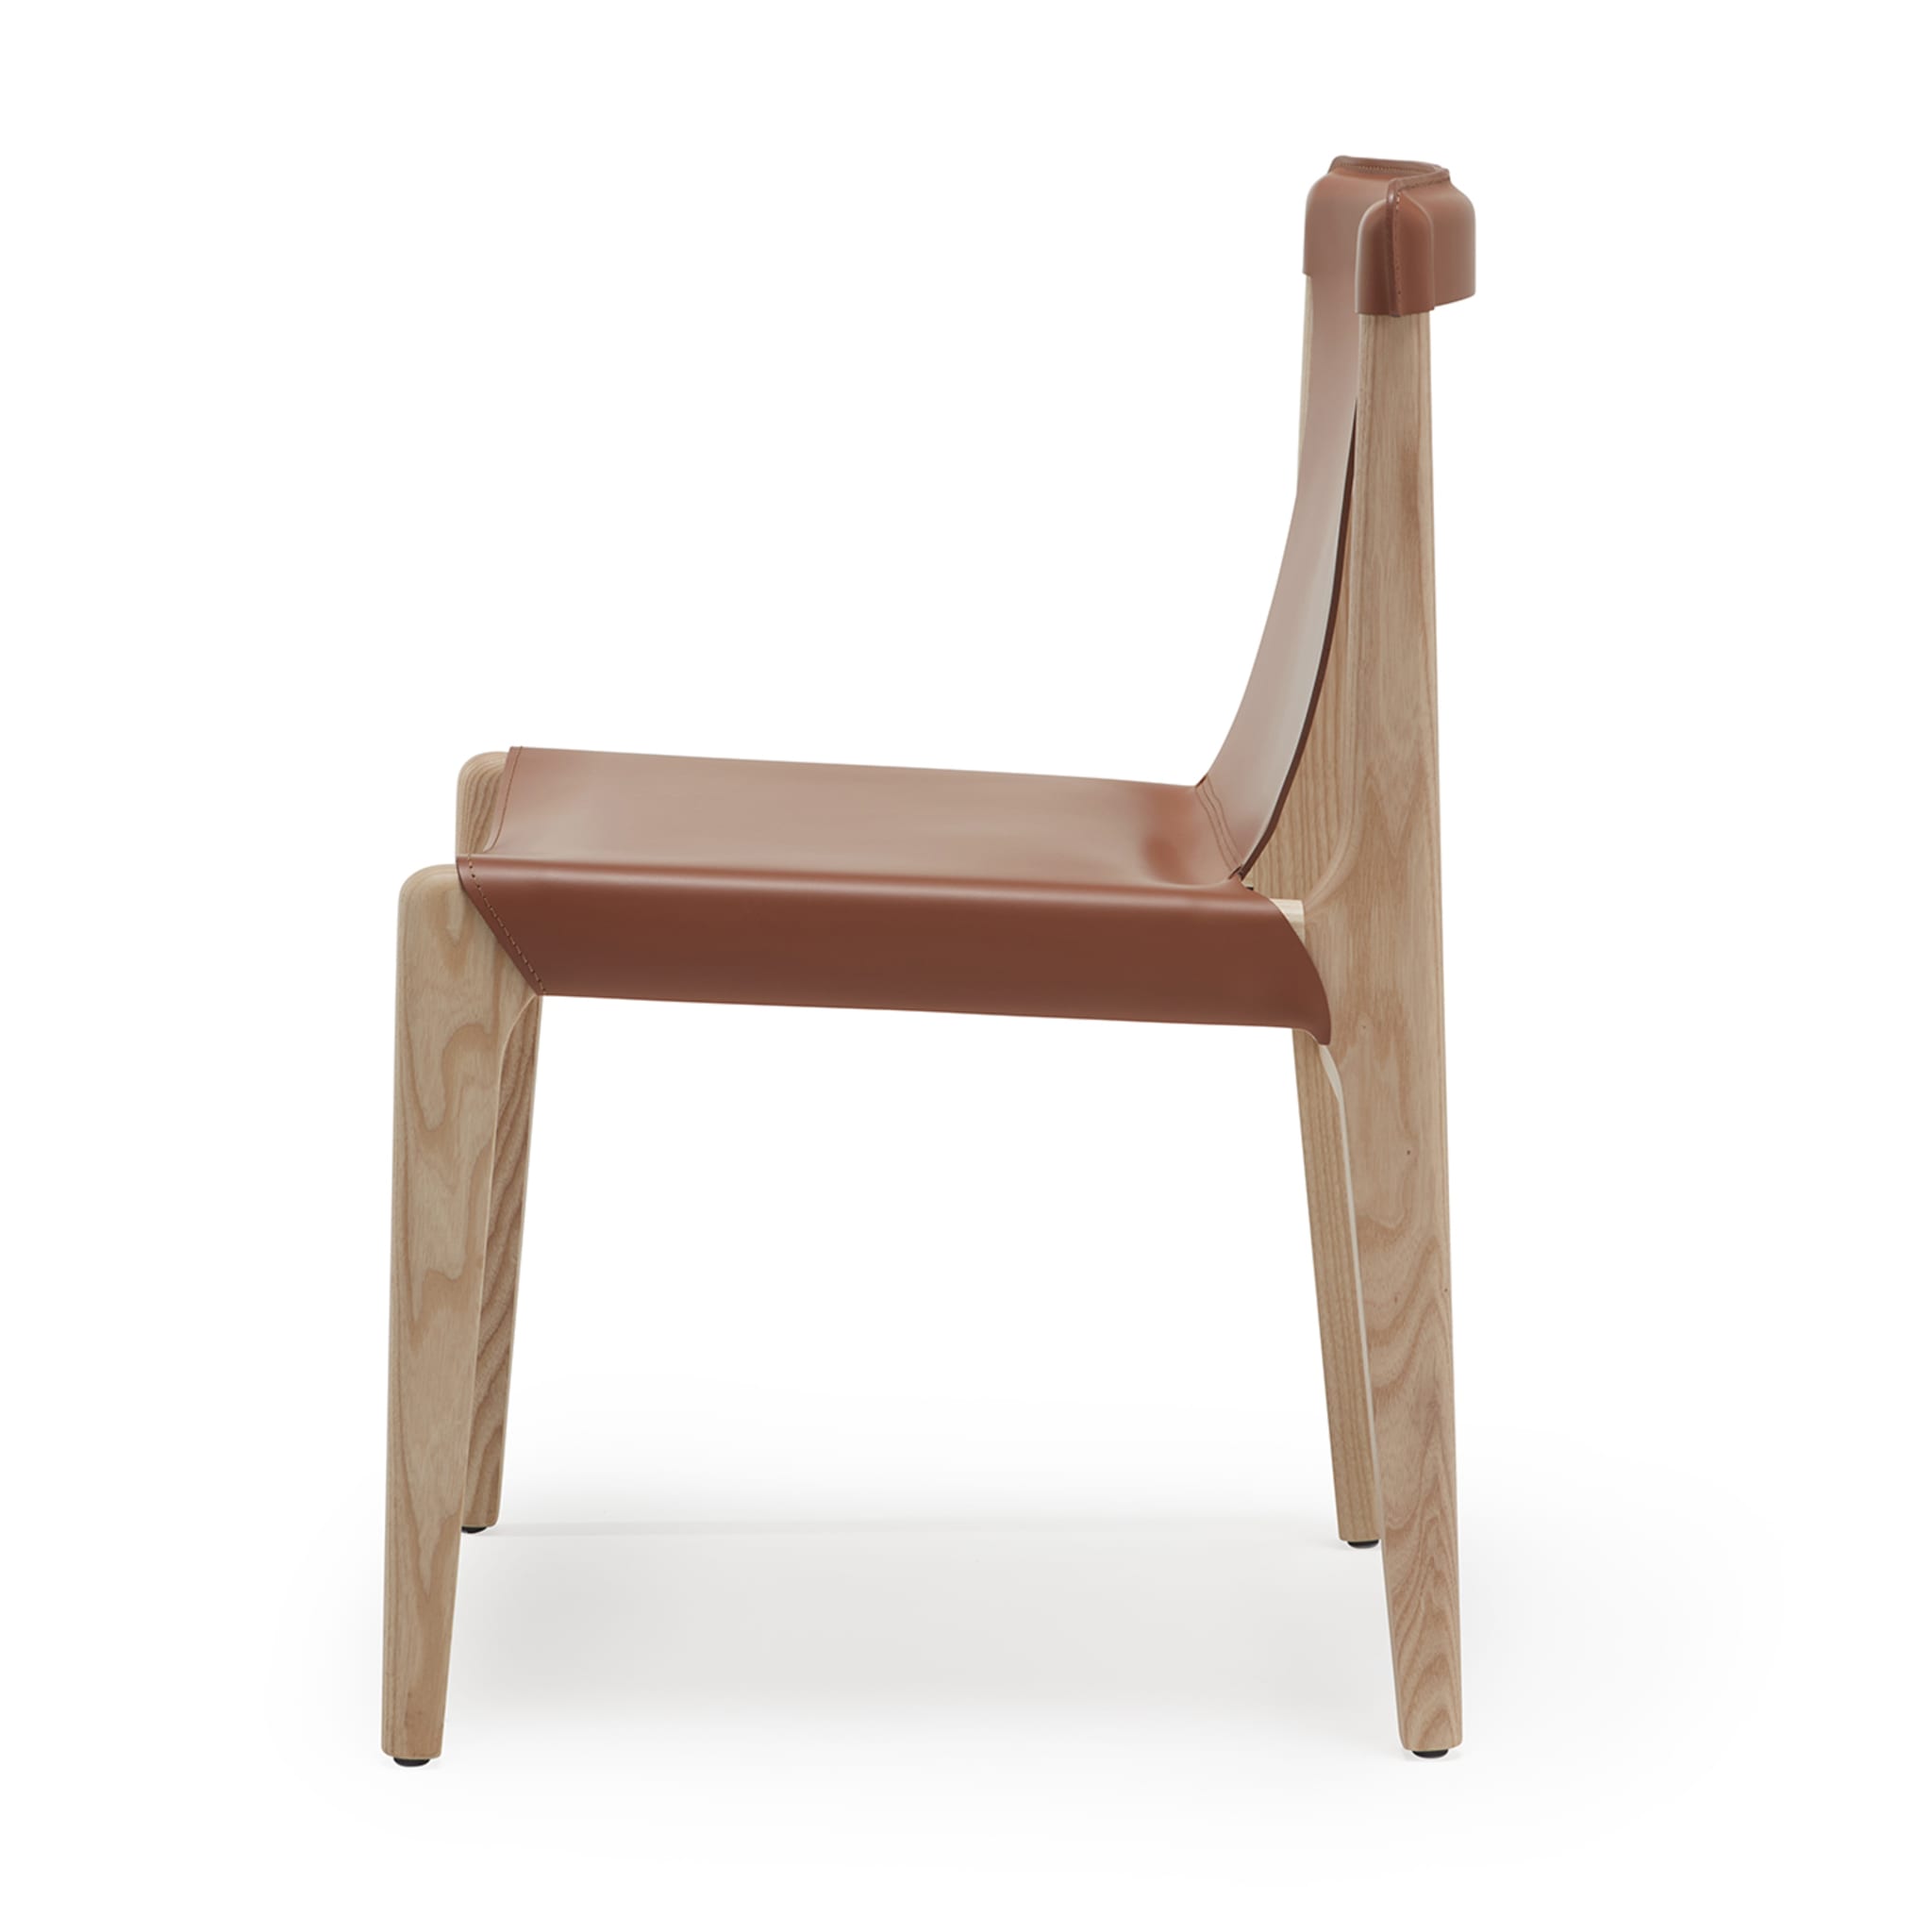 Burano Leather Chair by Balutto Associati - Alternative view 2